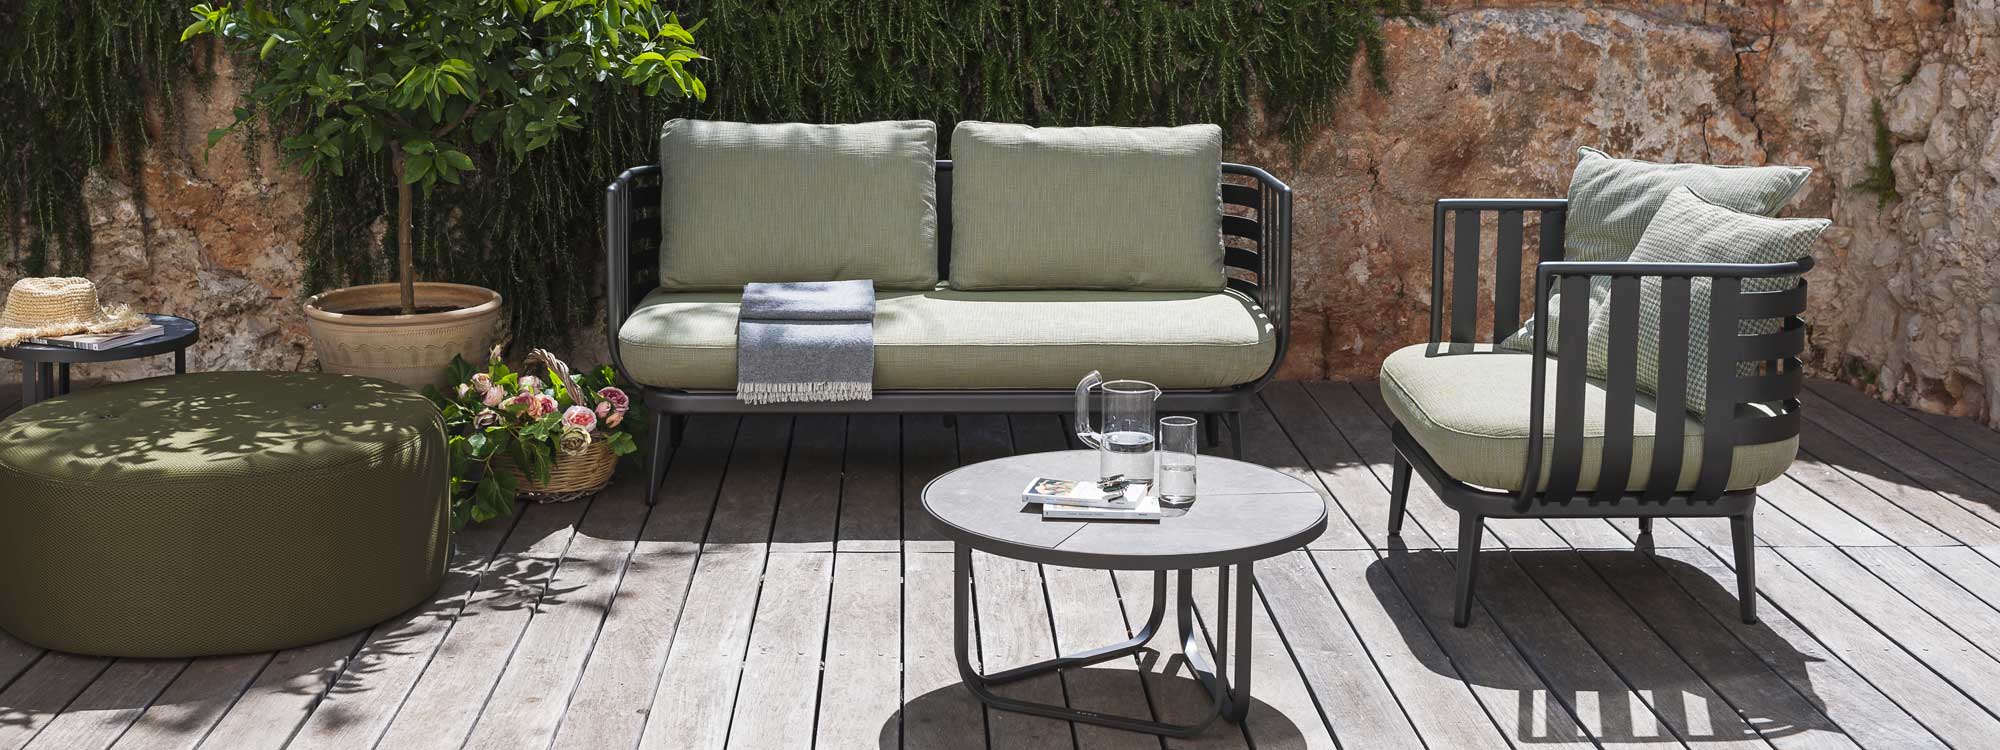 Image of RODA Thea aluminum garden sofa, lounge chair and low tables with Double round garden pouf against rustic stone wall